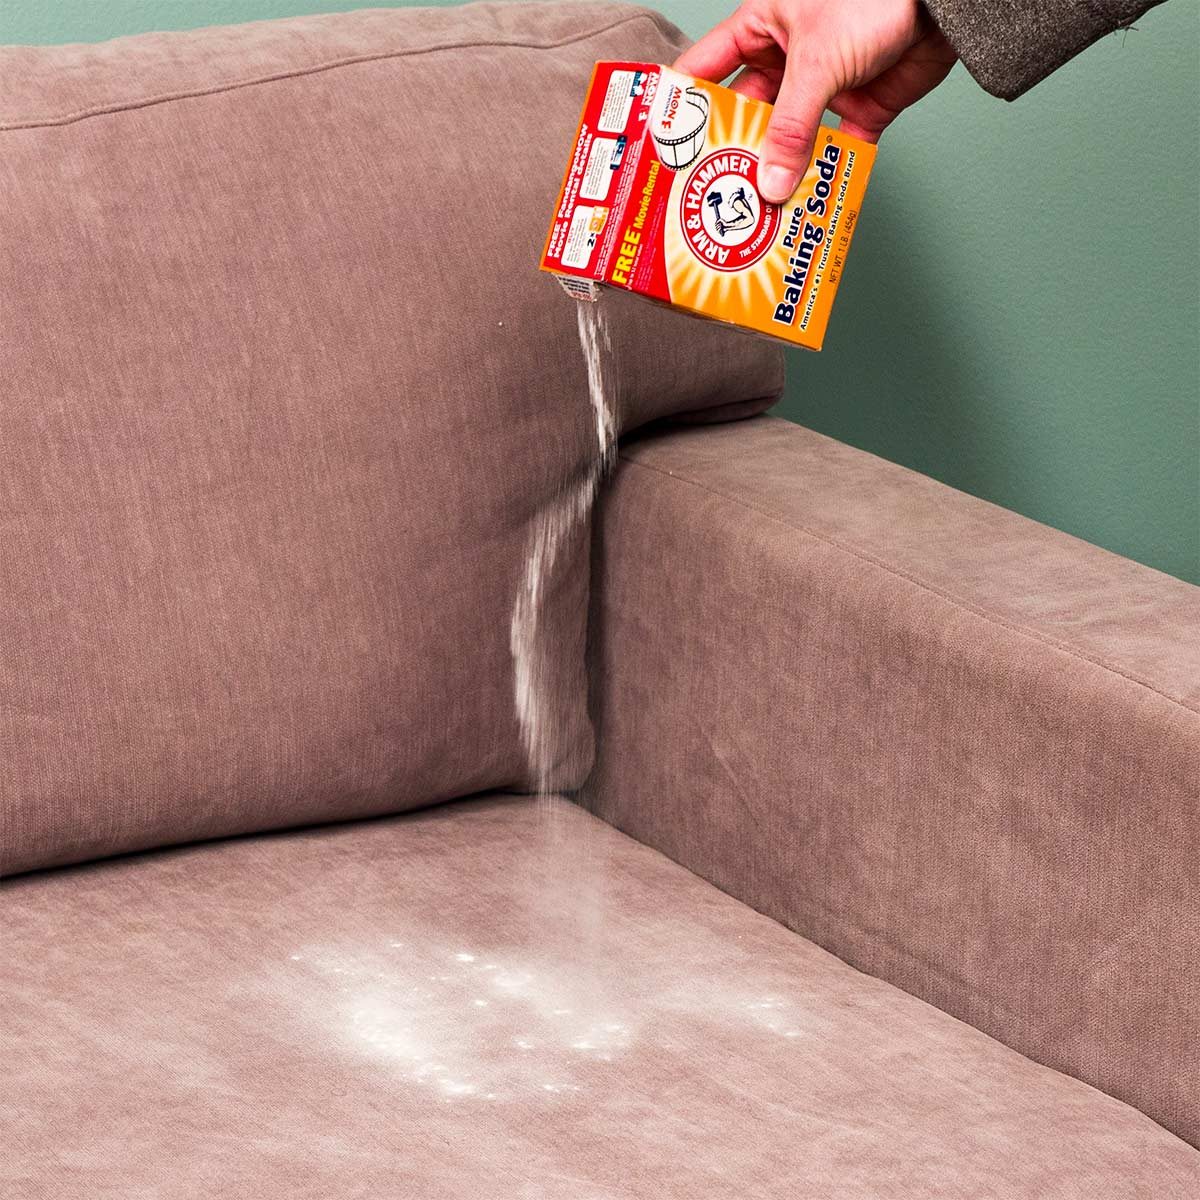 How do I go about cleaning my couch? Can I just remove the stuffing